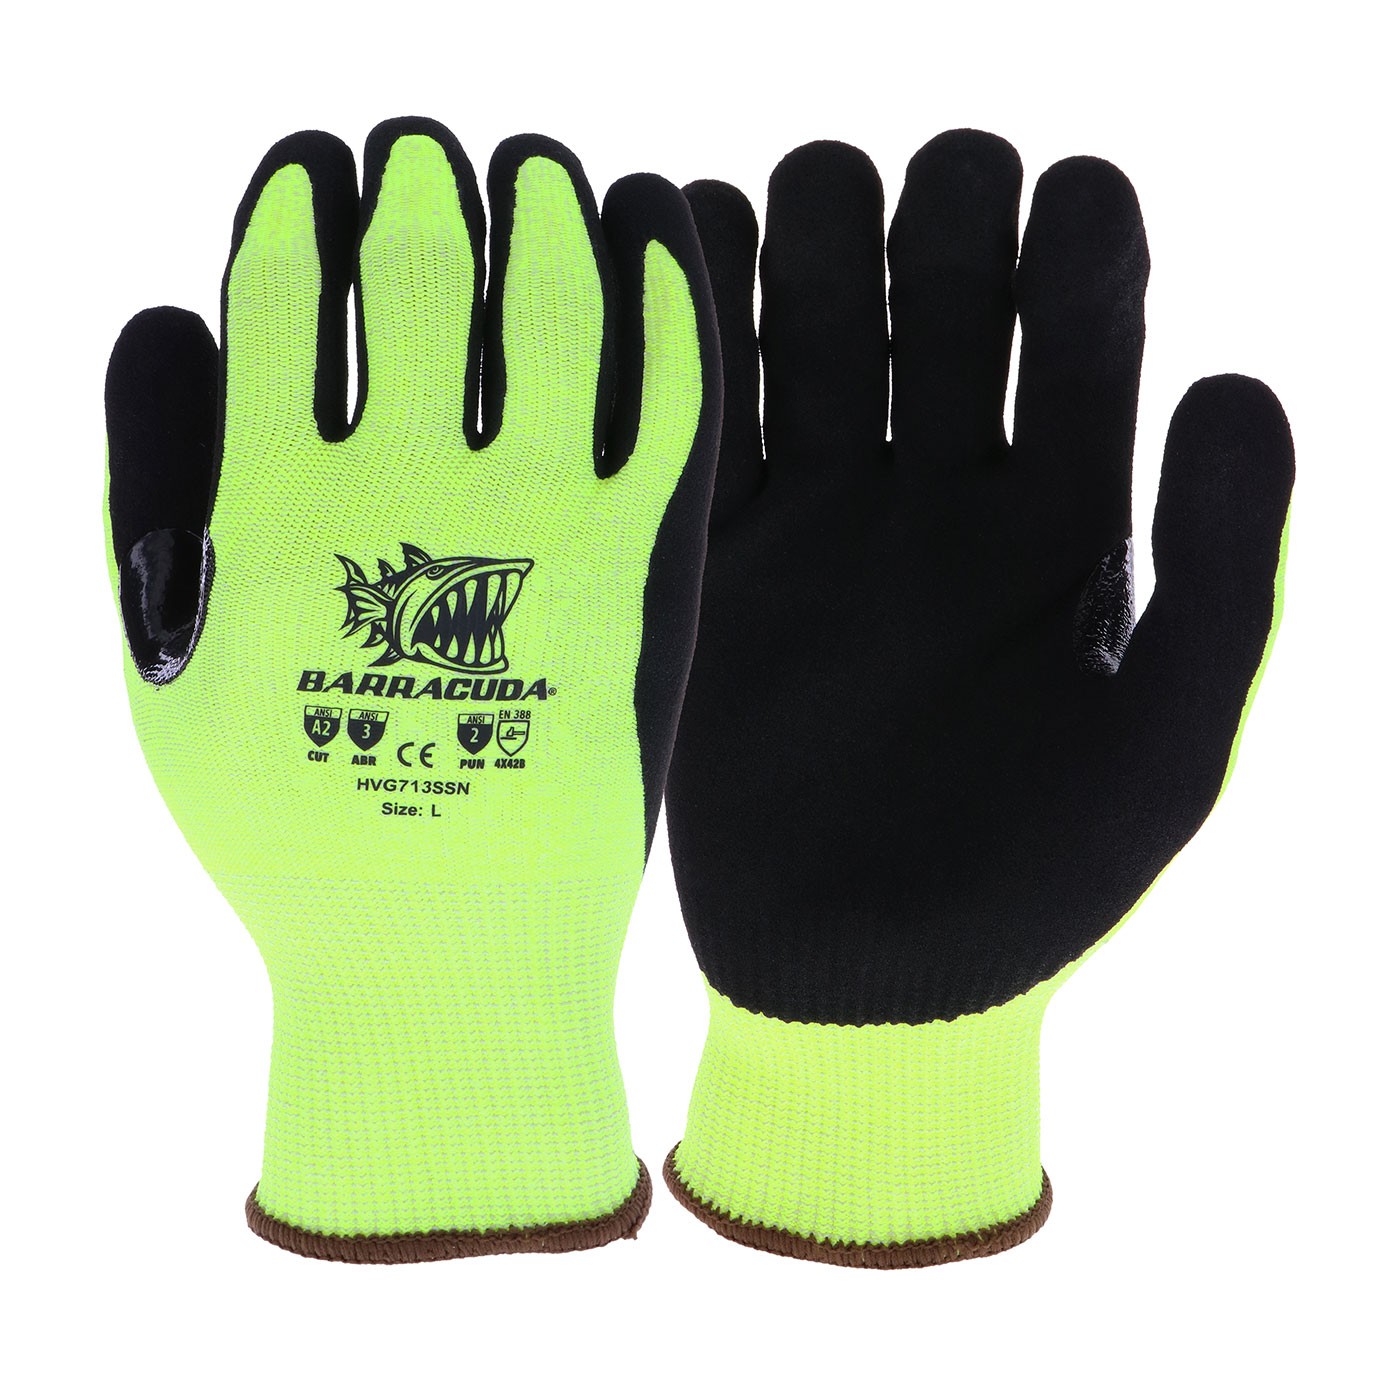 Barracuda® Hi-Vis Seamless Knit HPPE Blended Glove with Nitrile Coated Sandy Grip on Palm & Fingers - Touchscreen Compatible  (#HVG713SSN)